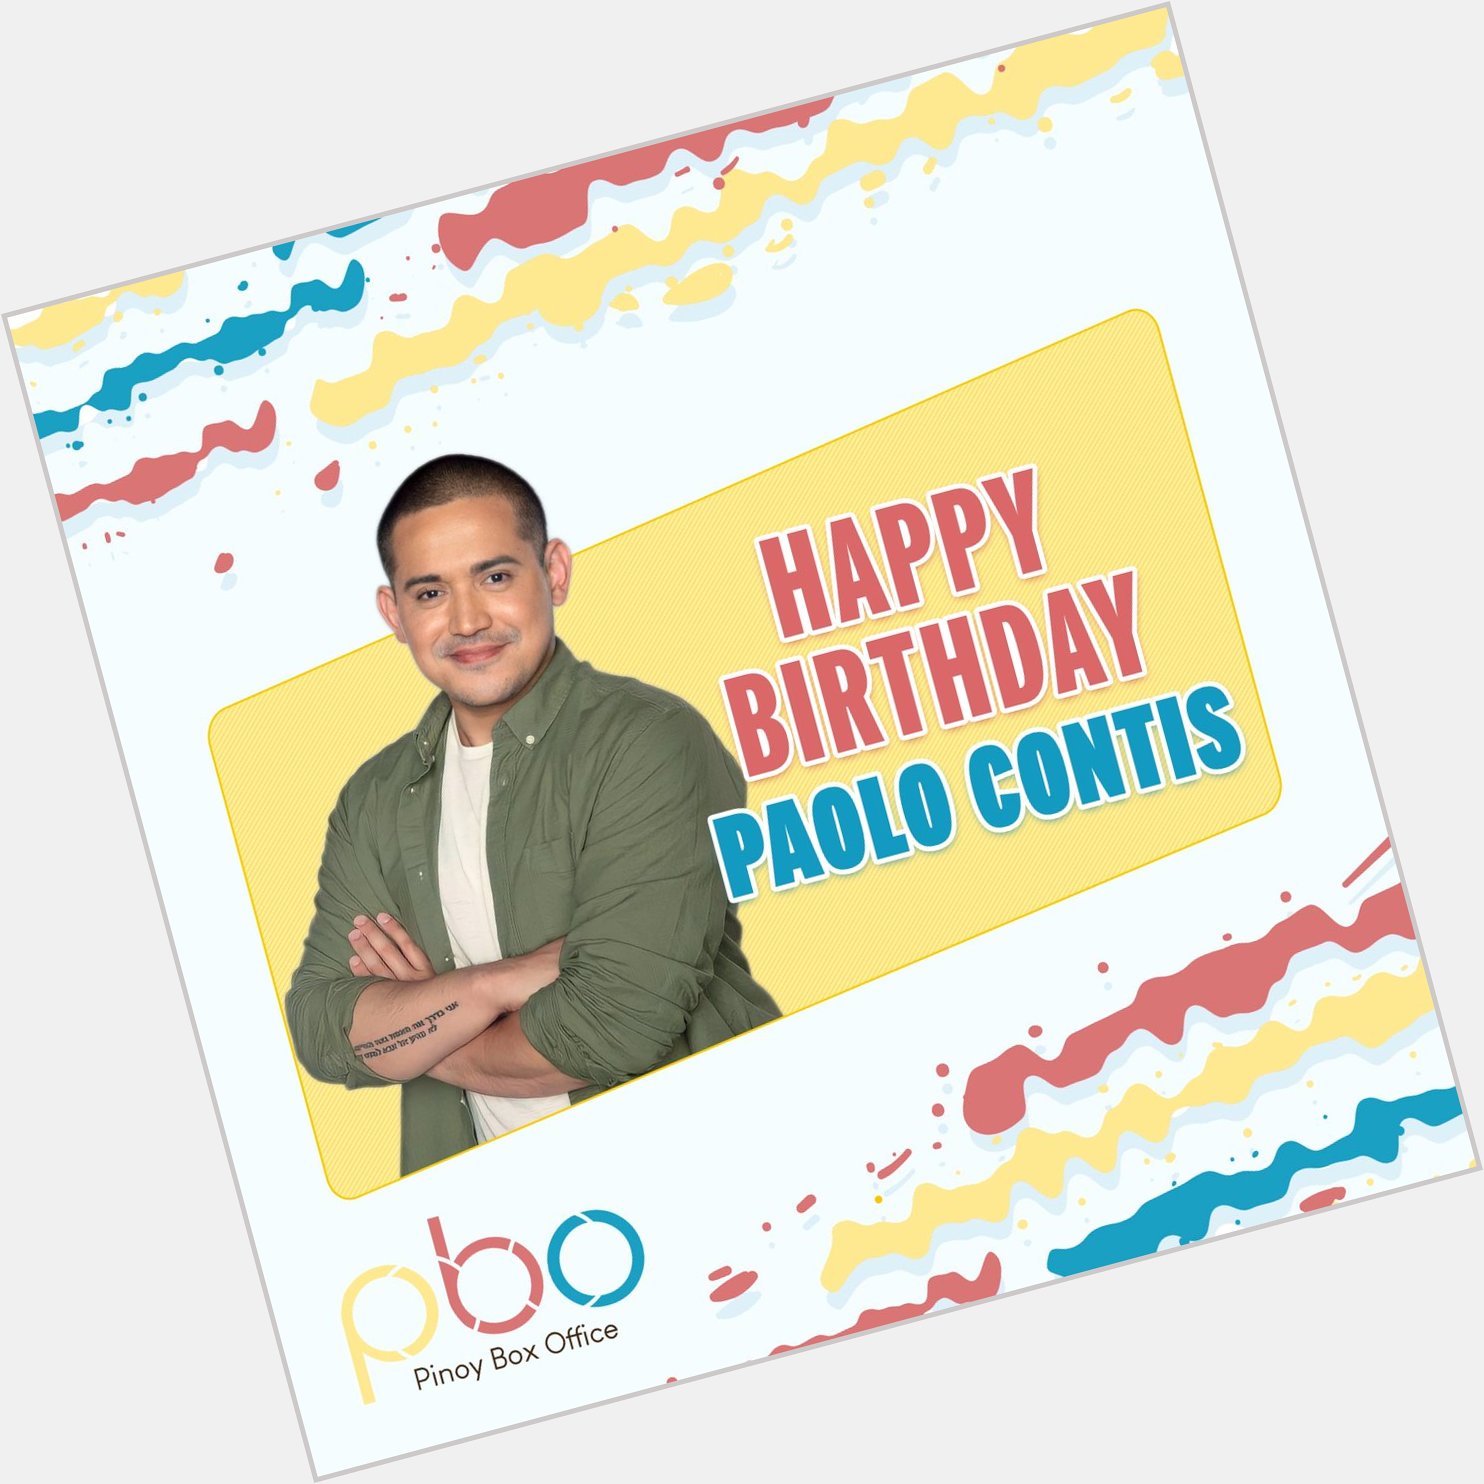 Happy birthday, Paolo Contis! May your special day be amazing, wonderful, and unforgettable just like you! 